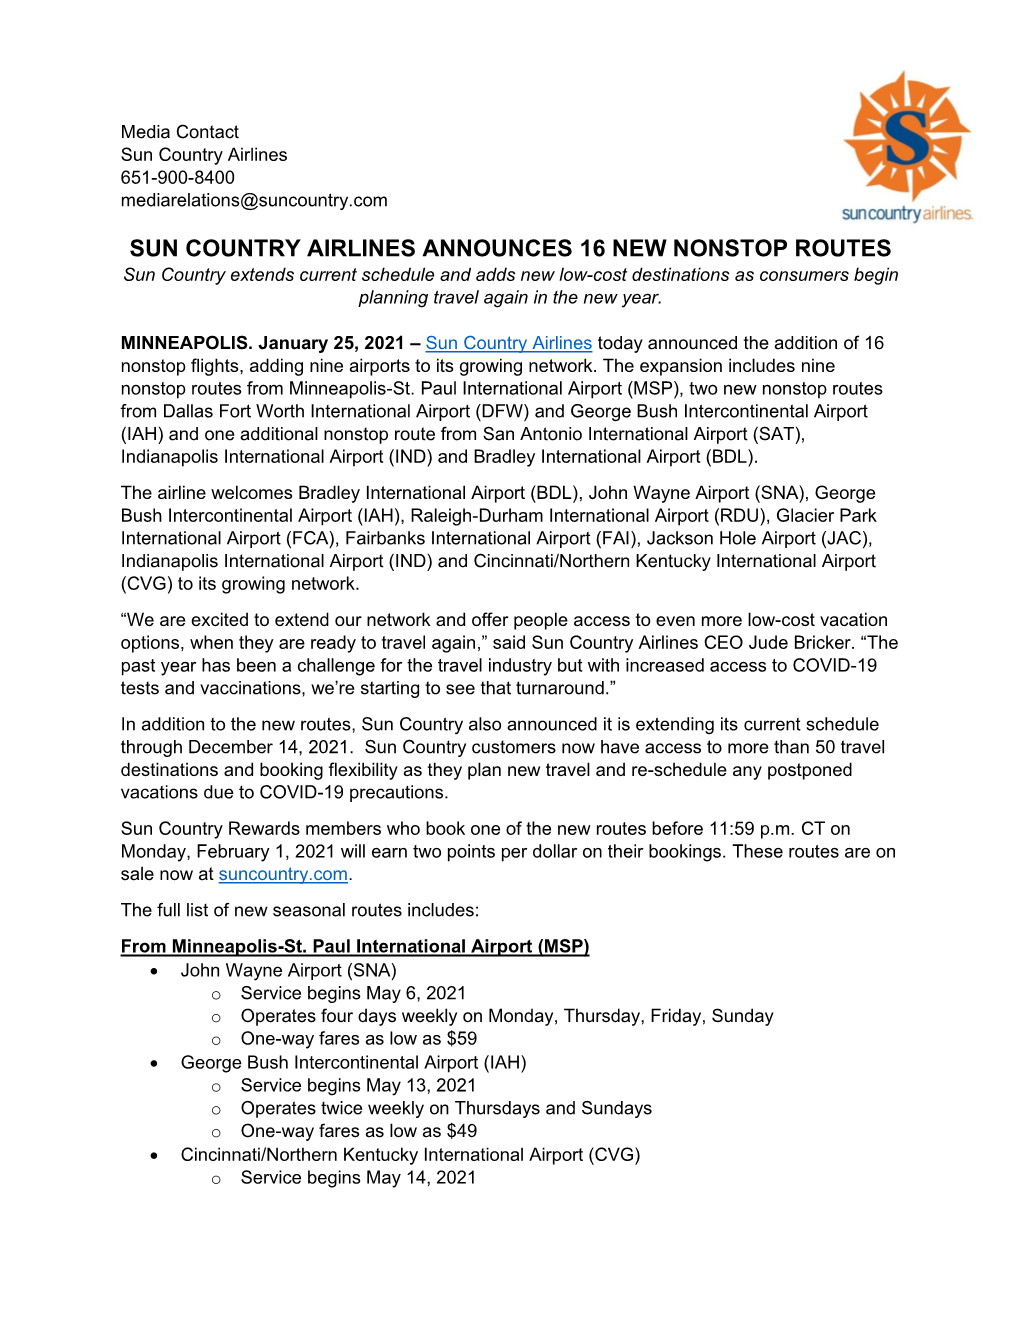 Sun Country Airlines Announces 16 New Nonstop